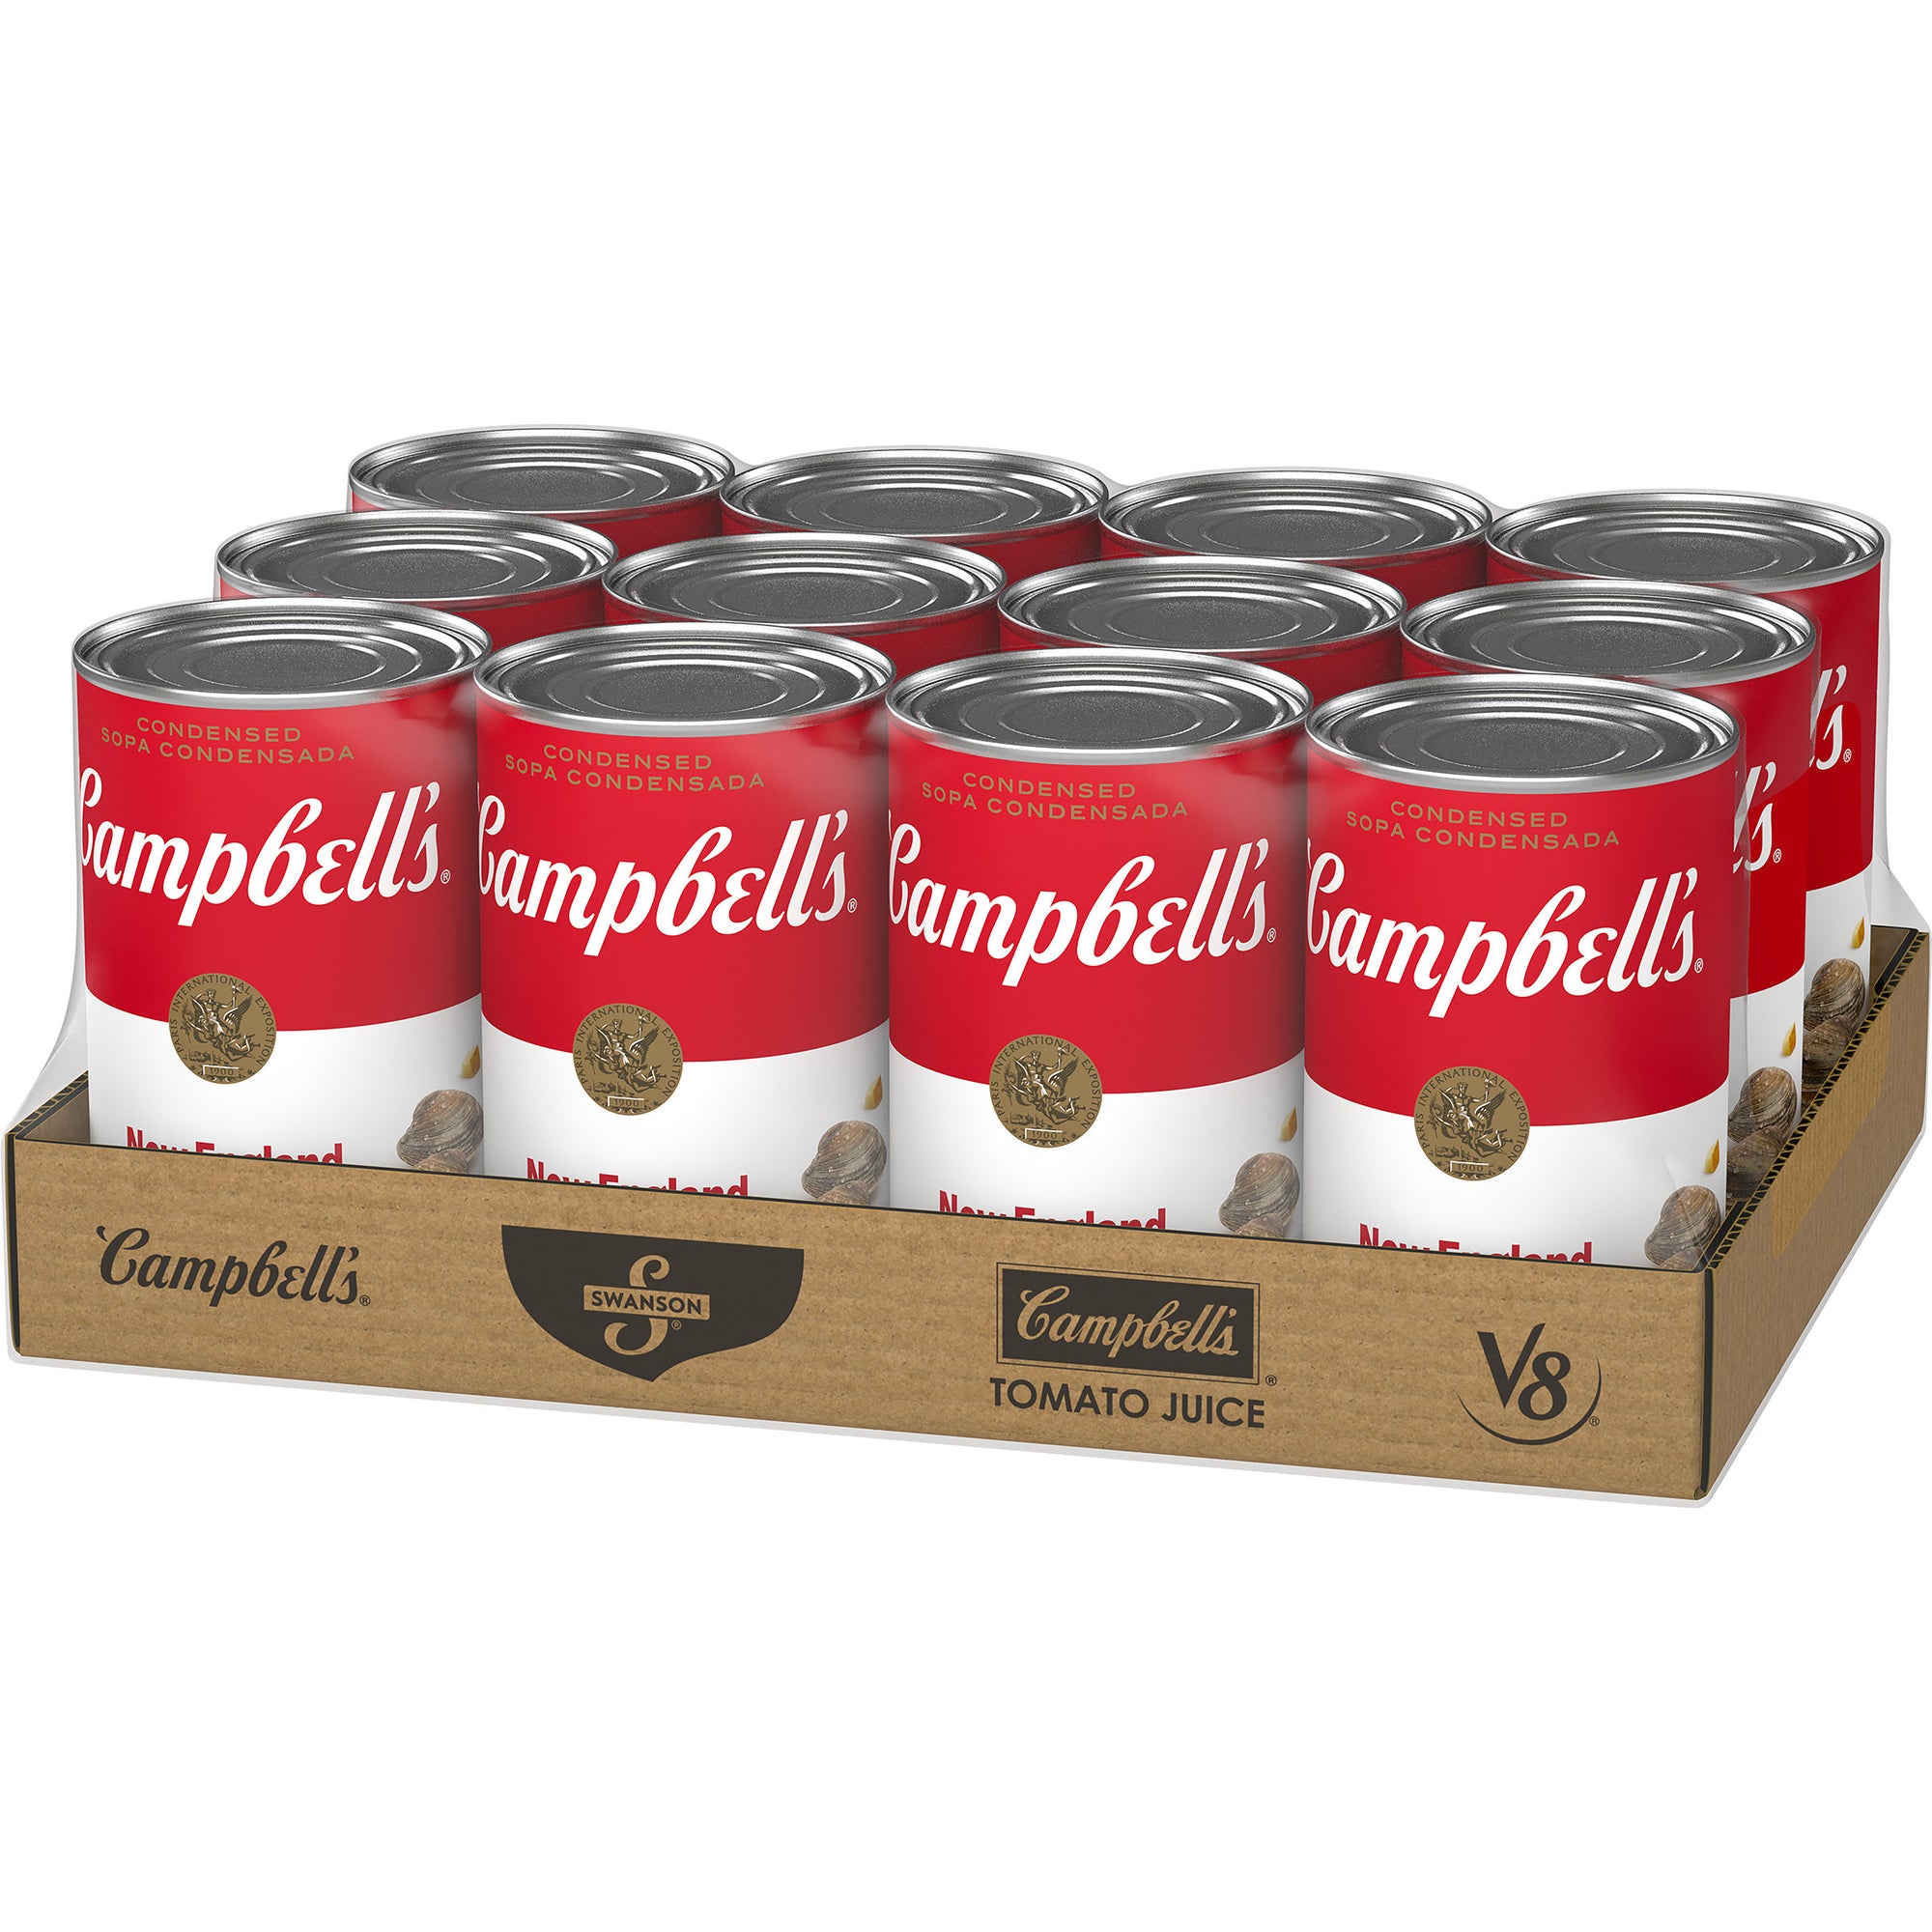 CAMPBELL'S CLASSIC NEW ENGLAND CLAM CHOWDER CONDENSED SHELF STABLE SOUP, 12 - 50 OZ